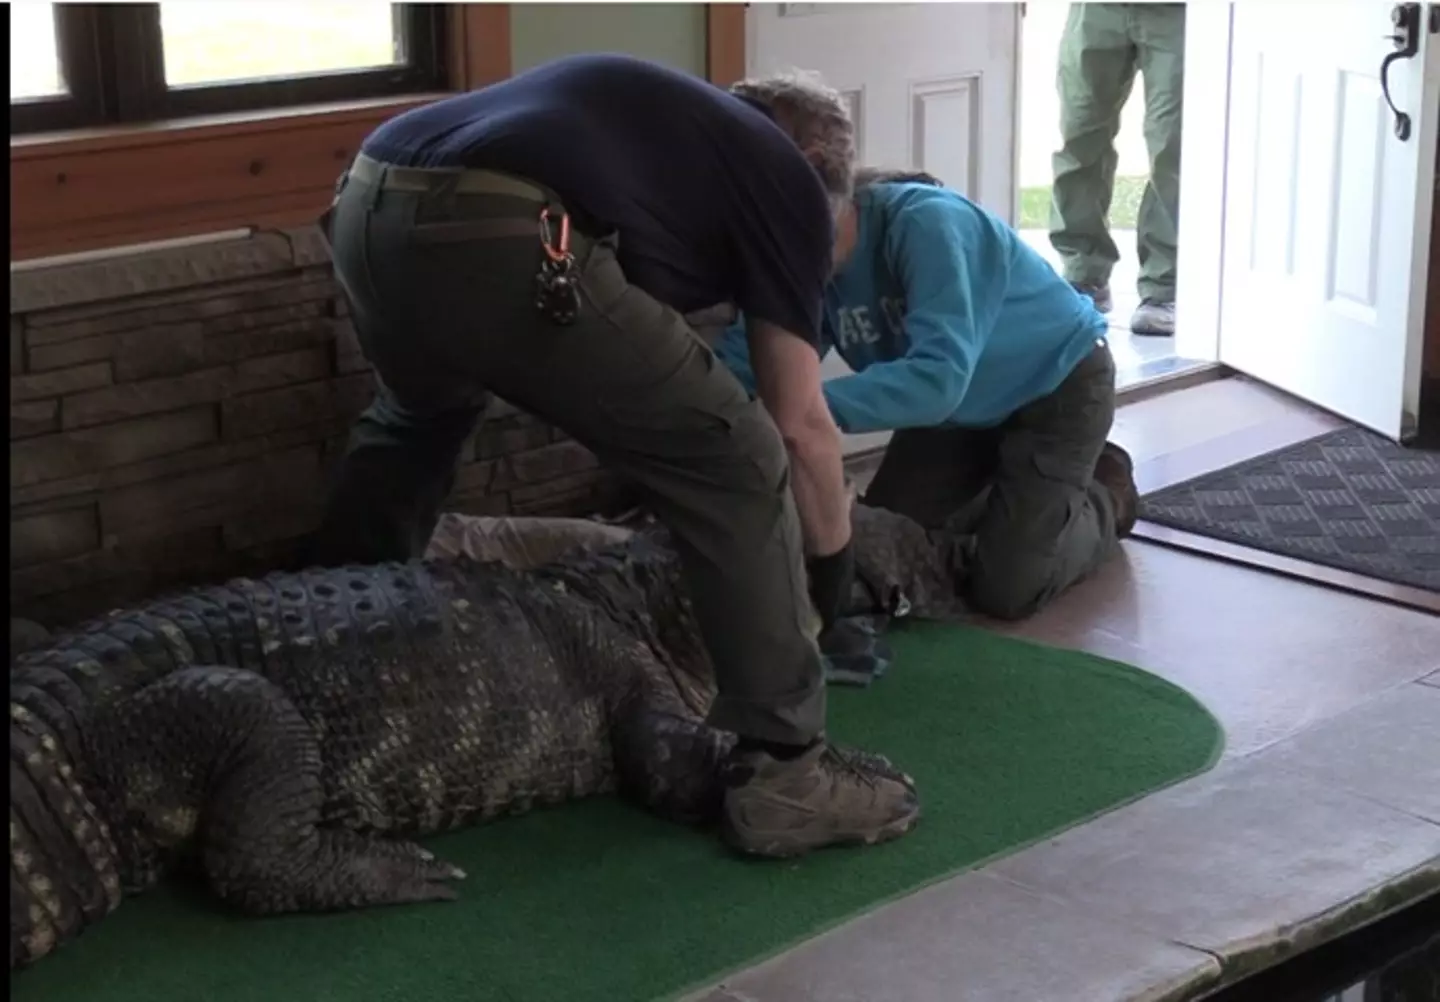 The 11-foot alligator was around 30 years old.